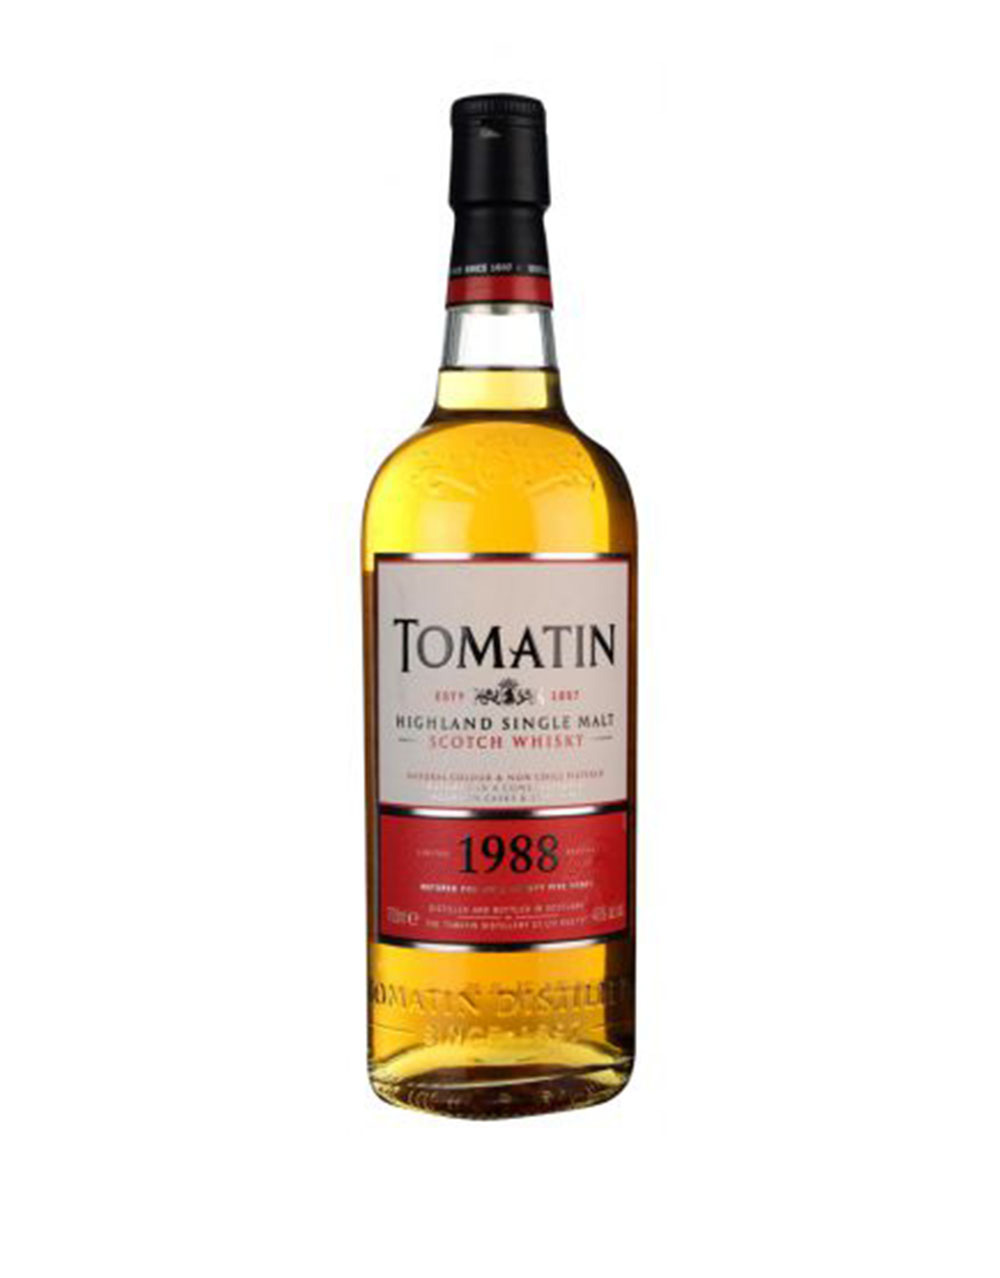 Tomatin 25 Year Old 1988 Batch 1 Limited Release